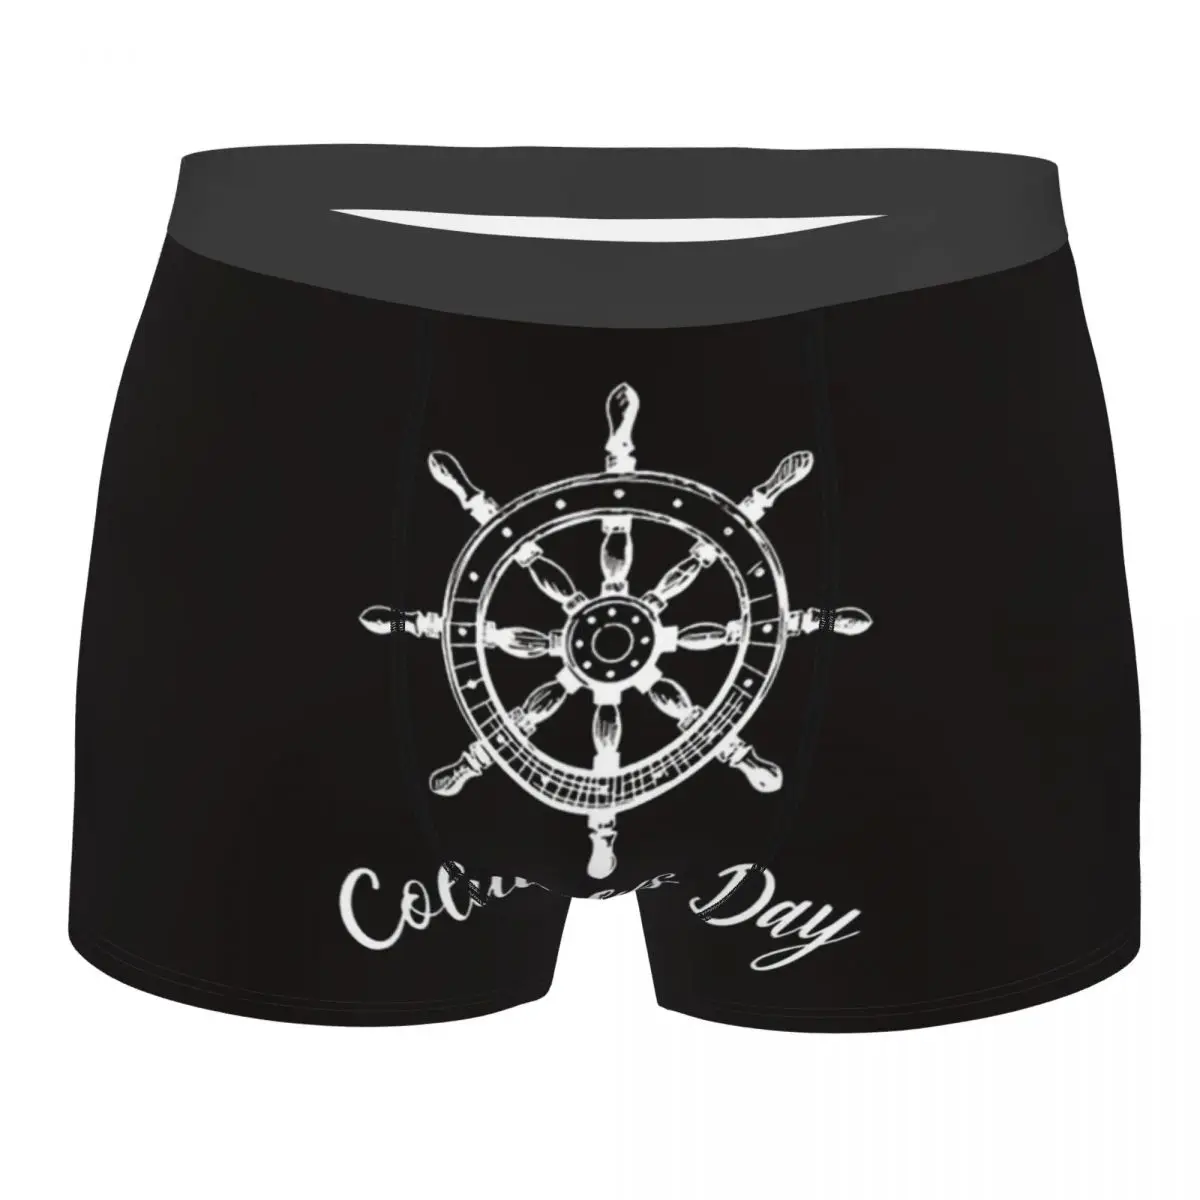 

COLUMBUS DAY (USA) - GIFT IDEA Knights of Columbus Underpants Homme Panties Male Underwear Ventilate